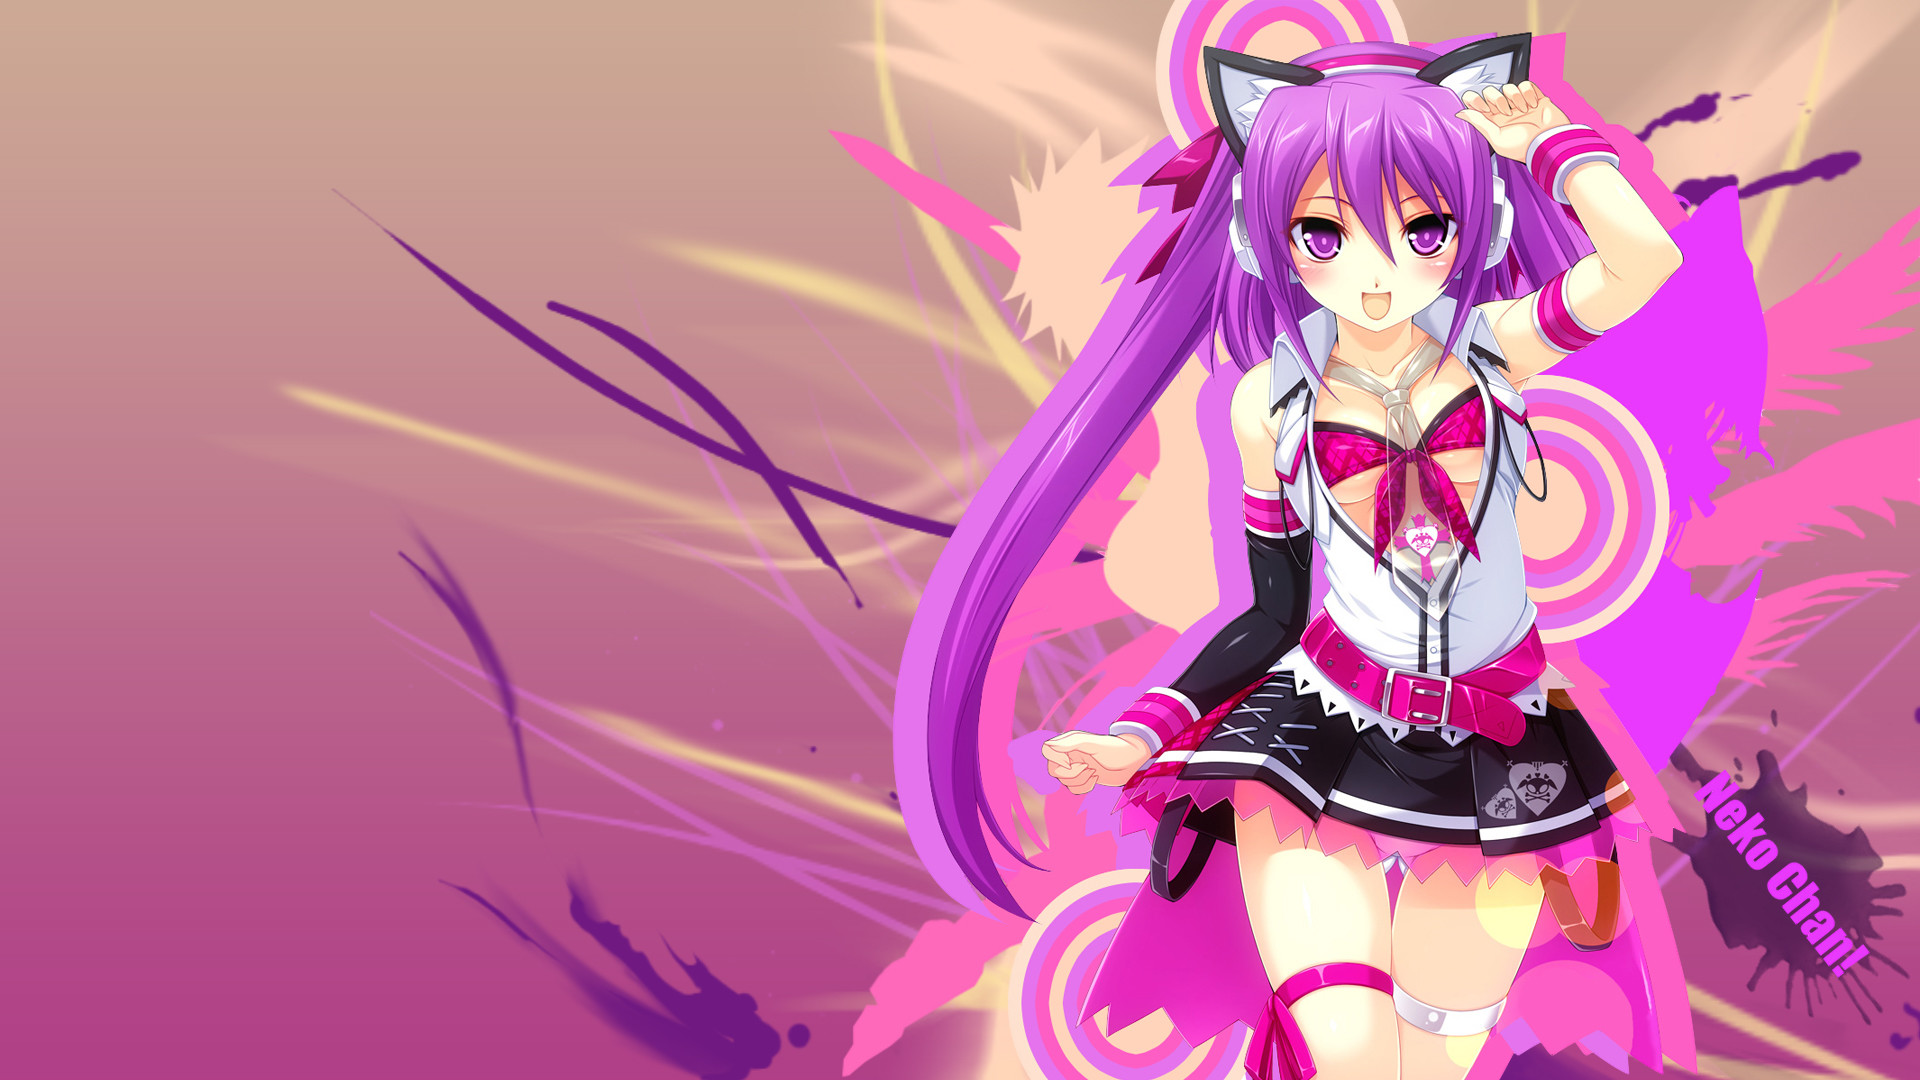 1920x1080 Wallpaper's Collection: Â«Anime Girl WallpapersÂ»